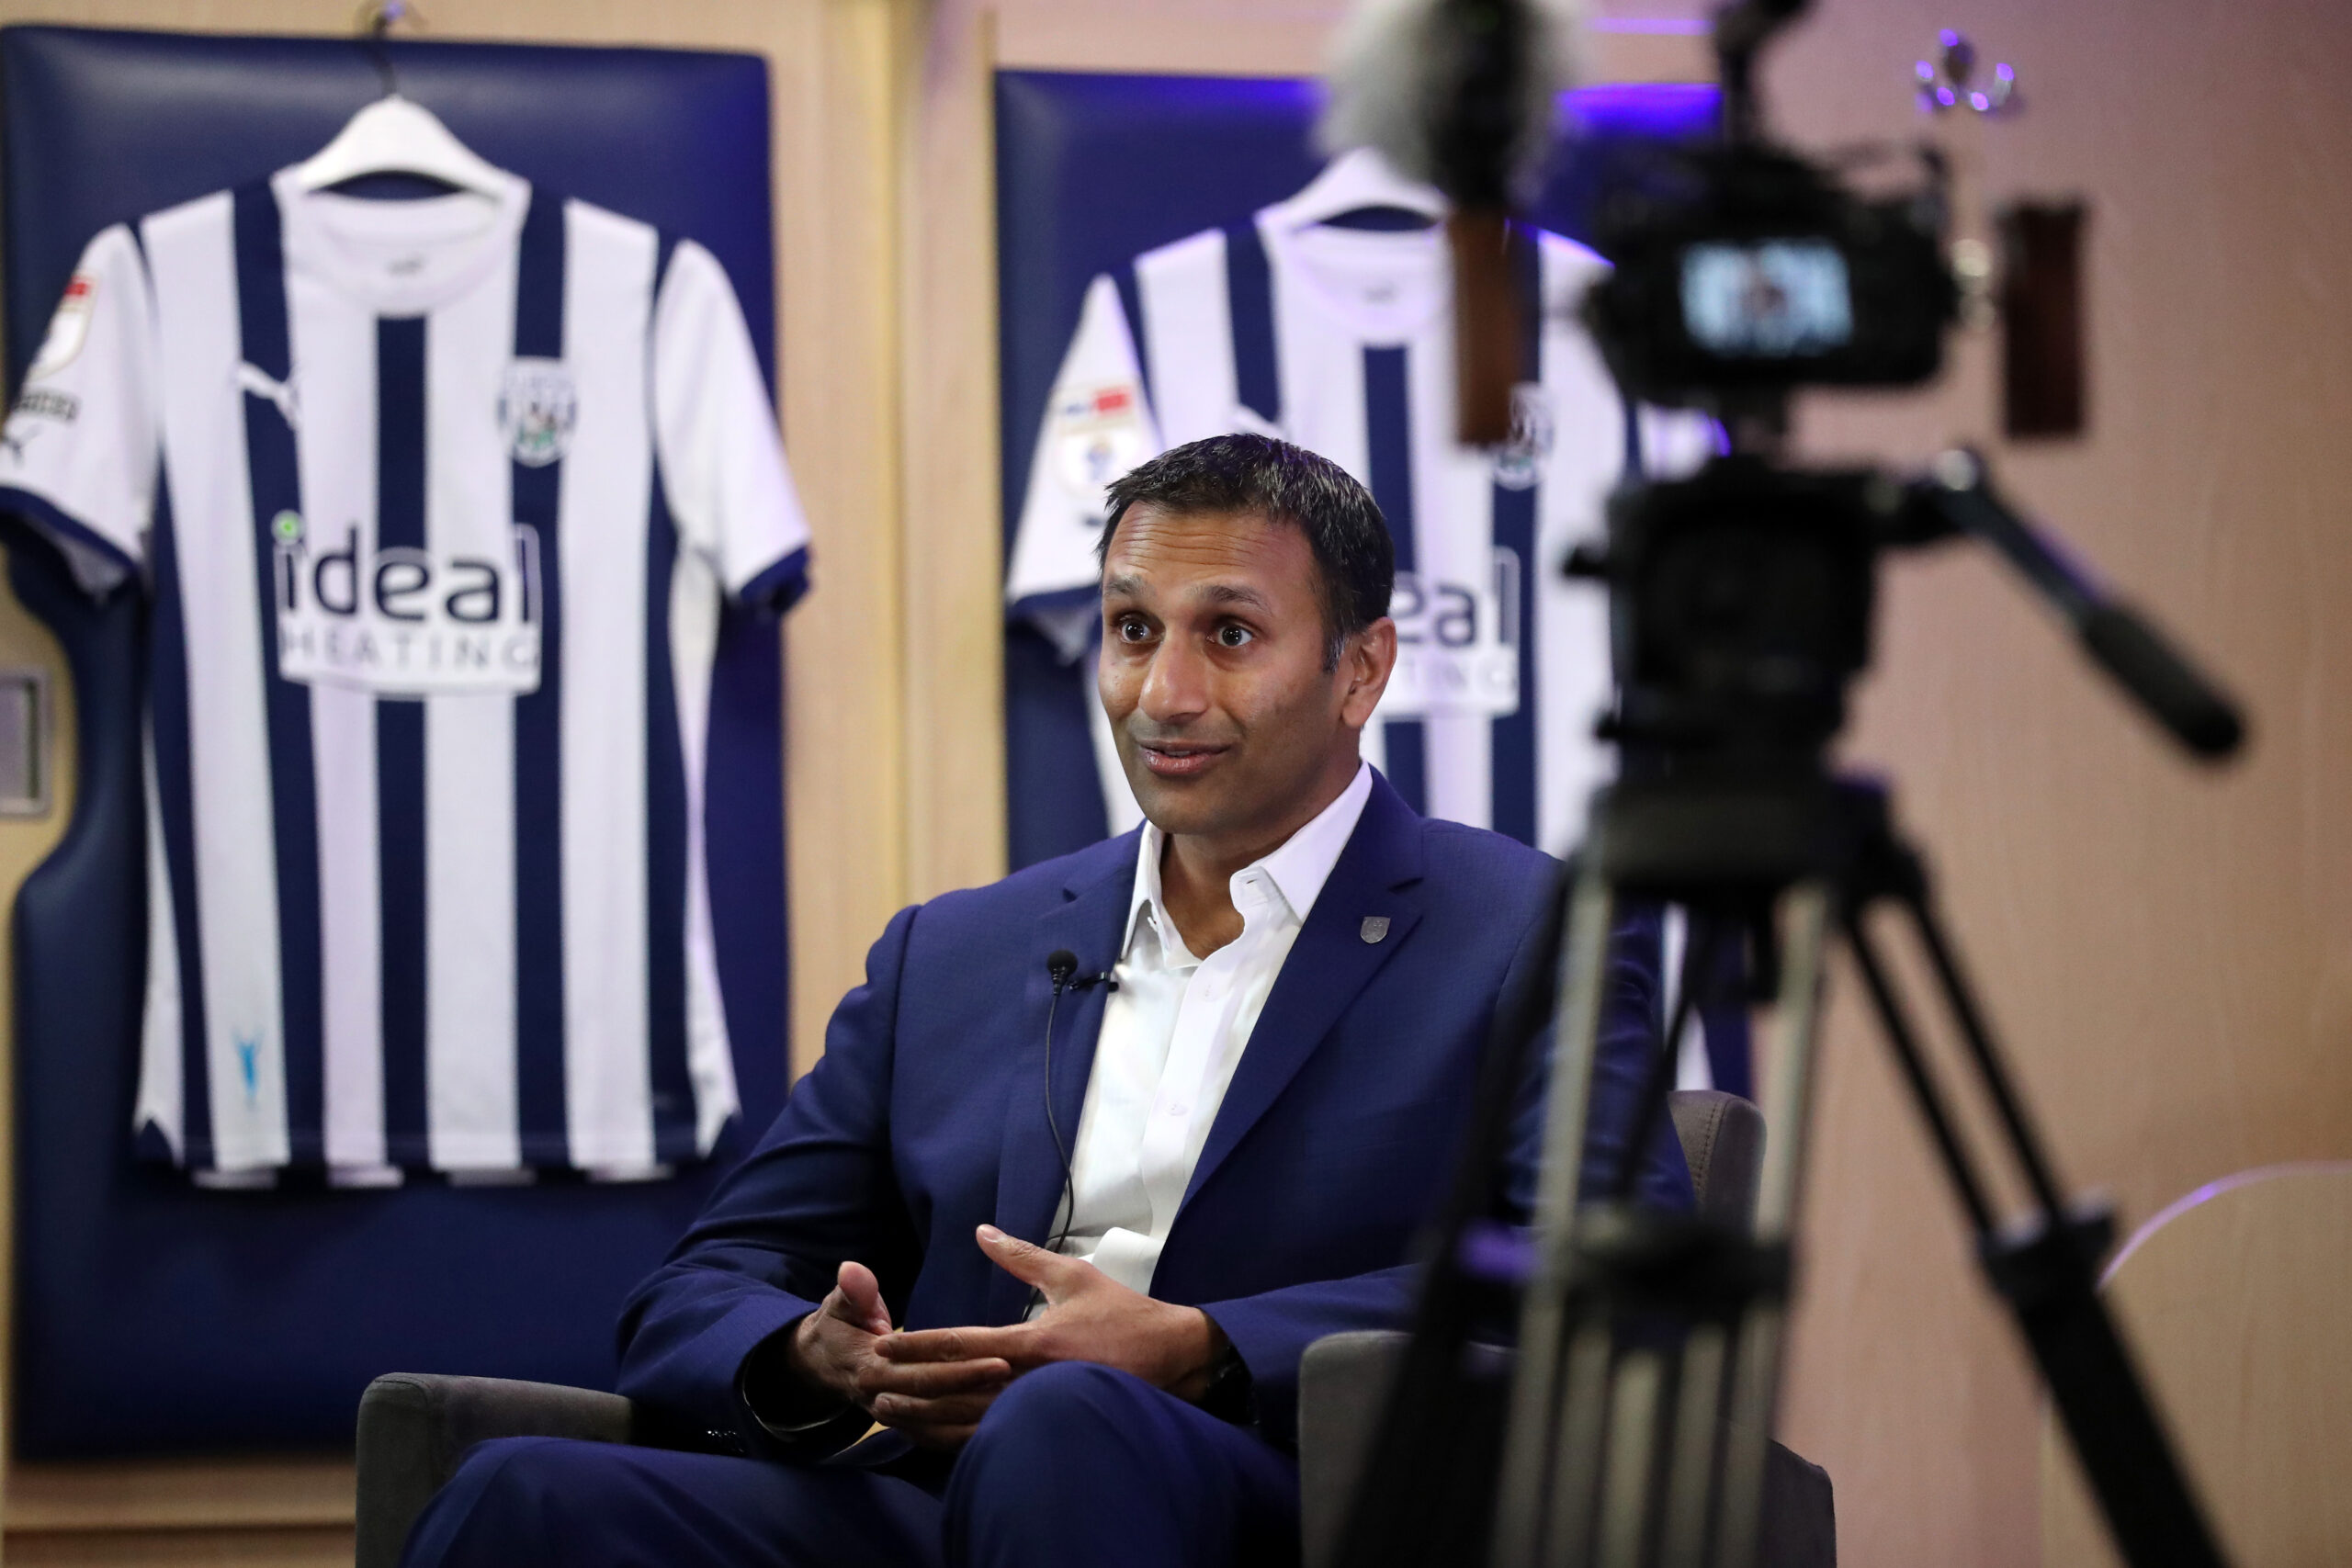 WestBrom Owner  Shilen Patel shortlist Four Good coach to replace Carlos Corberán and lead the team to success  including Former Coach…